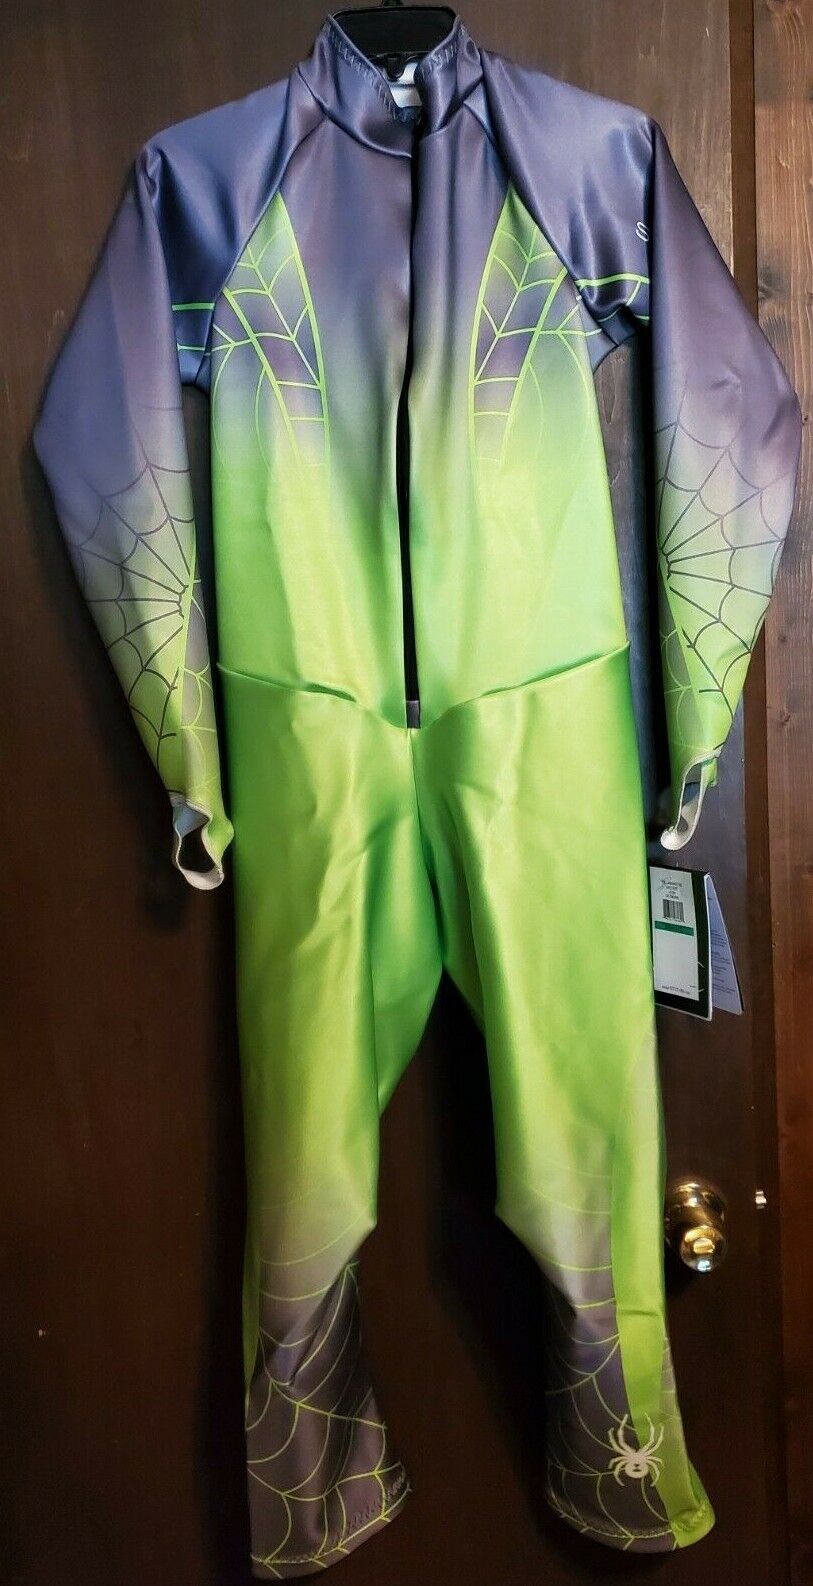 Max 51% OFF Spyder Mens Courier shipping free Performance DH Race Suit Green Large Grey NWT USA Sz